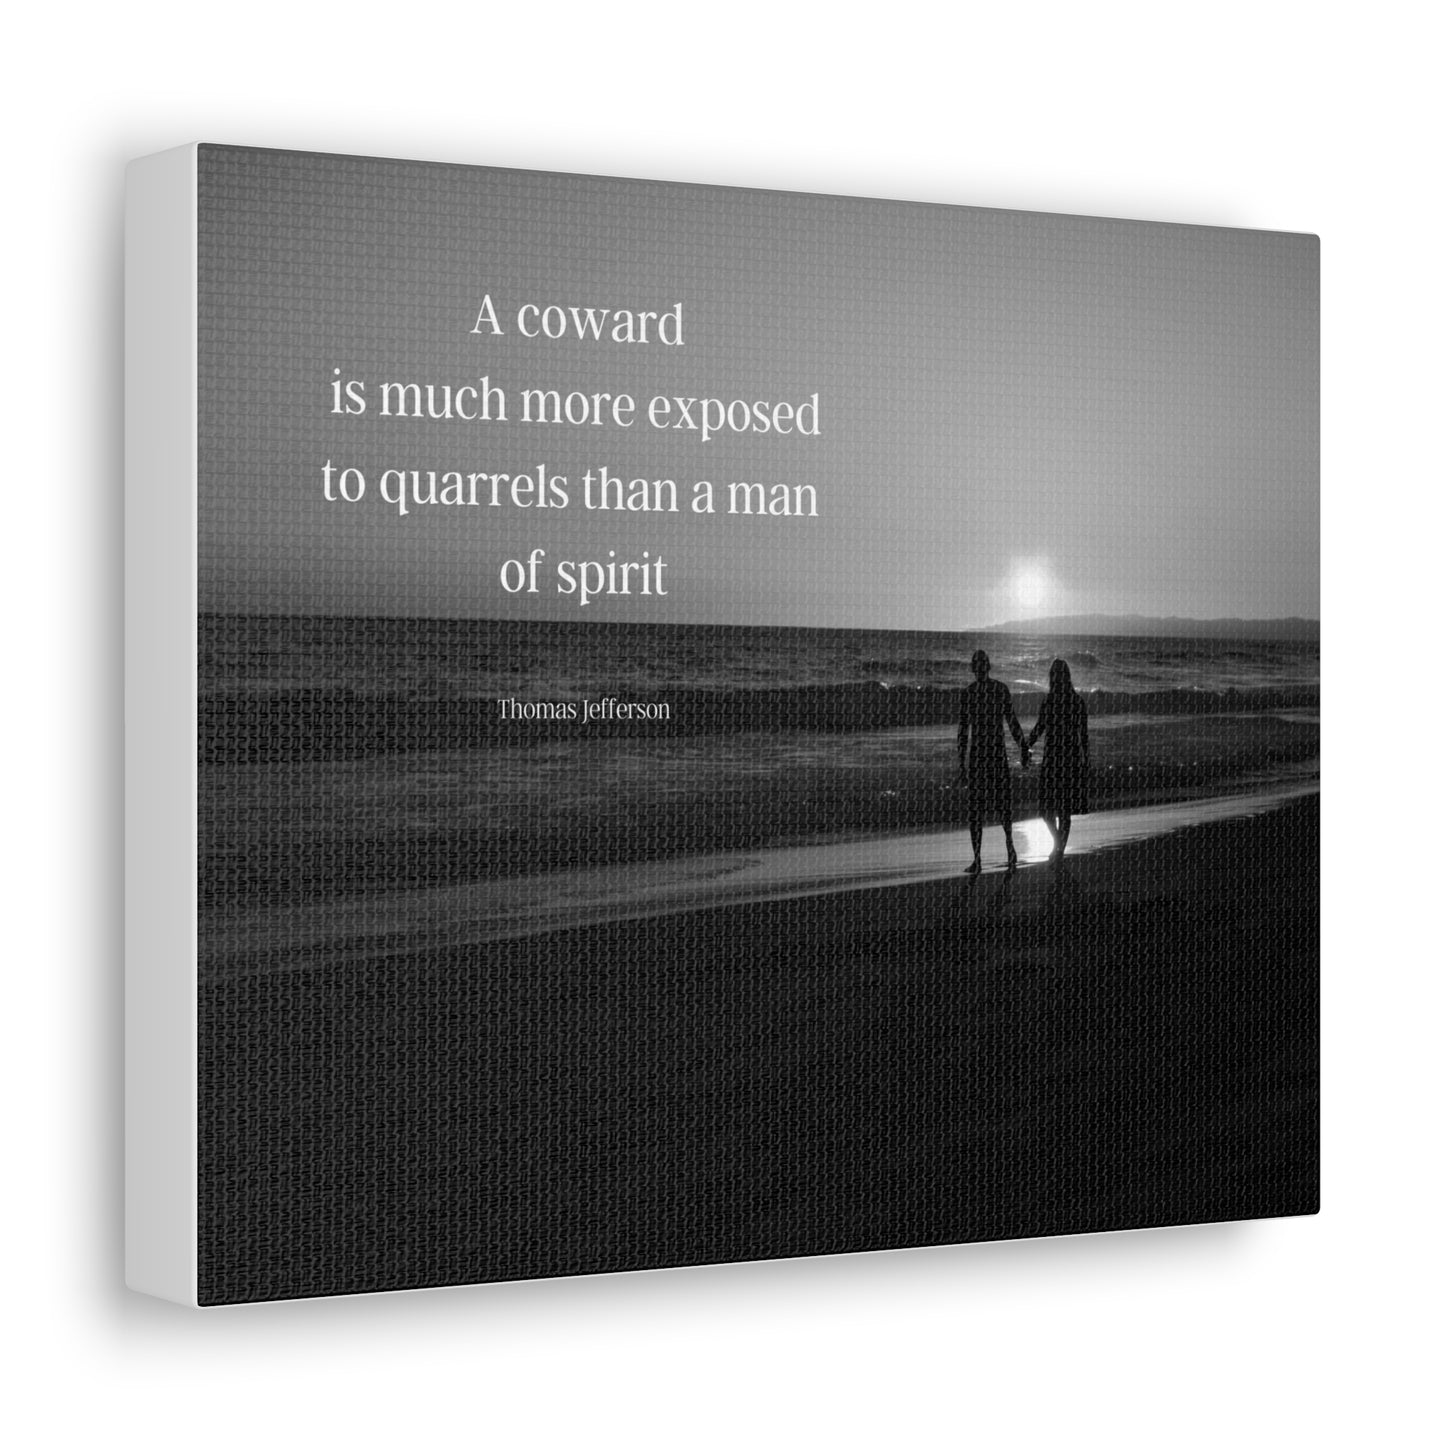 Thomas Jefferson Quote 6, Canvas Art, Horizontal Beach Print in Black and White, 3rd President of the United States, Ocean Art, Sunset, Nature, Political Art, Canvas Prints, Presidential Quotes, Inspirational Quotes